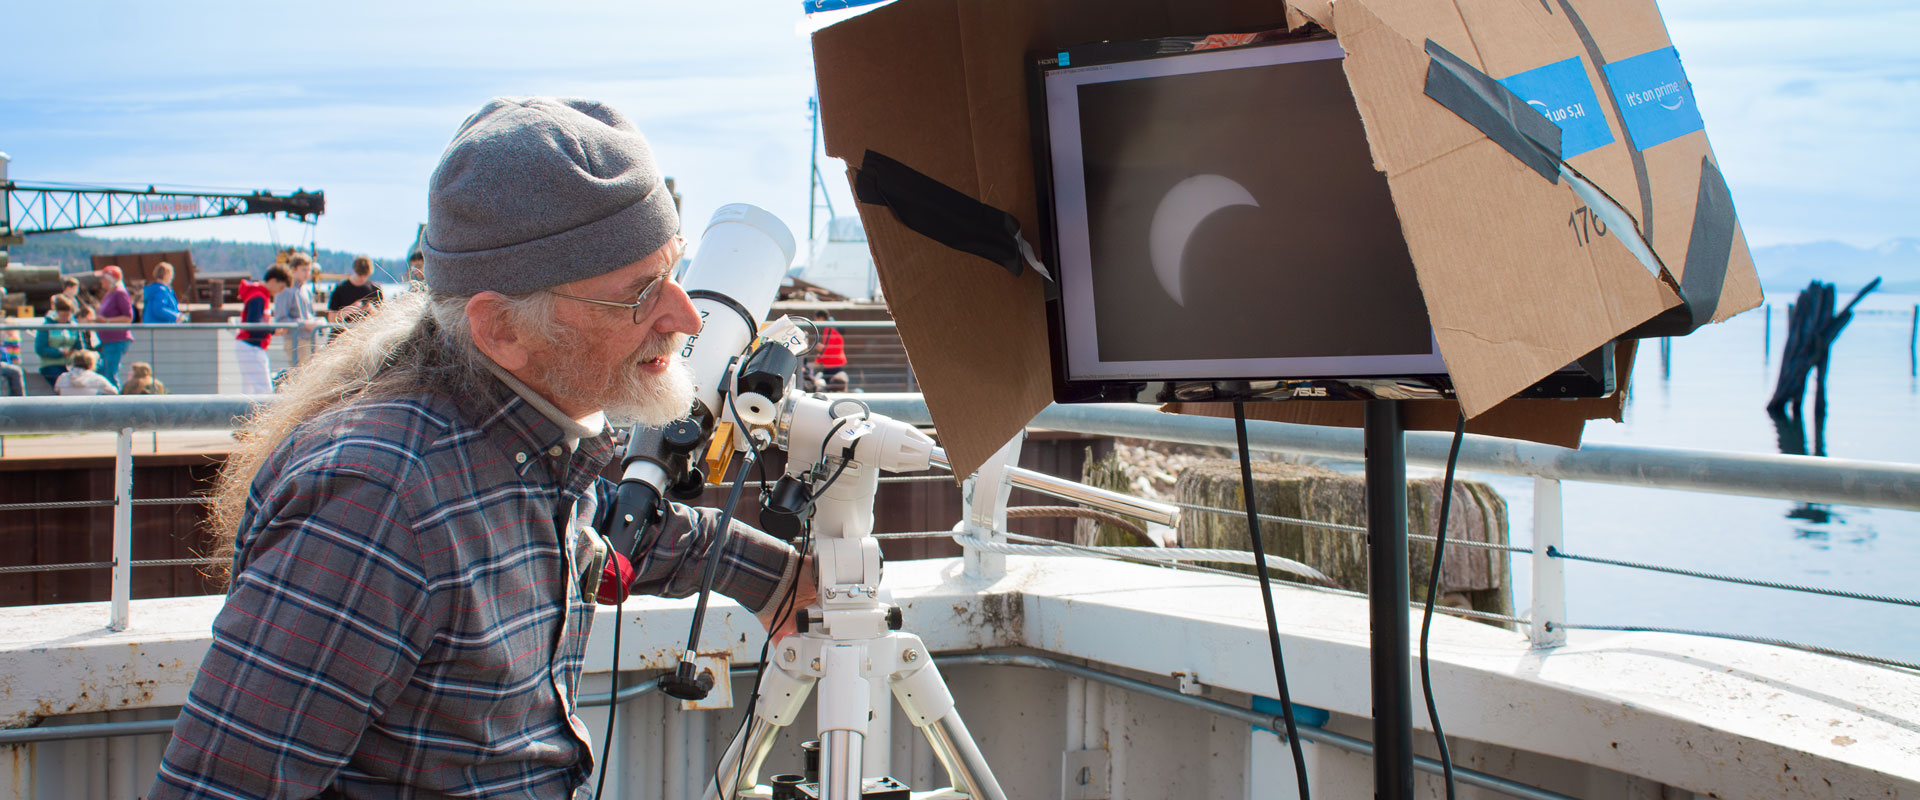 Jack from Vermont Astronomical Society stands next to a telescope while examining a monitor shielded by a cardboard box.